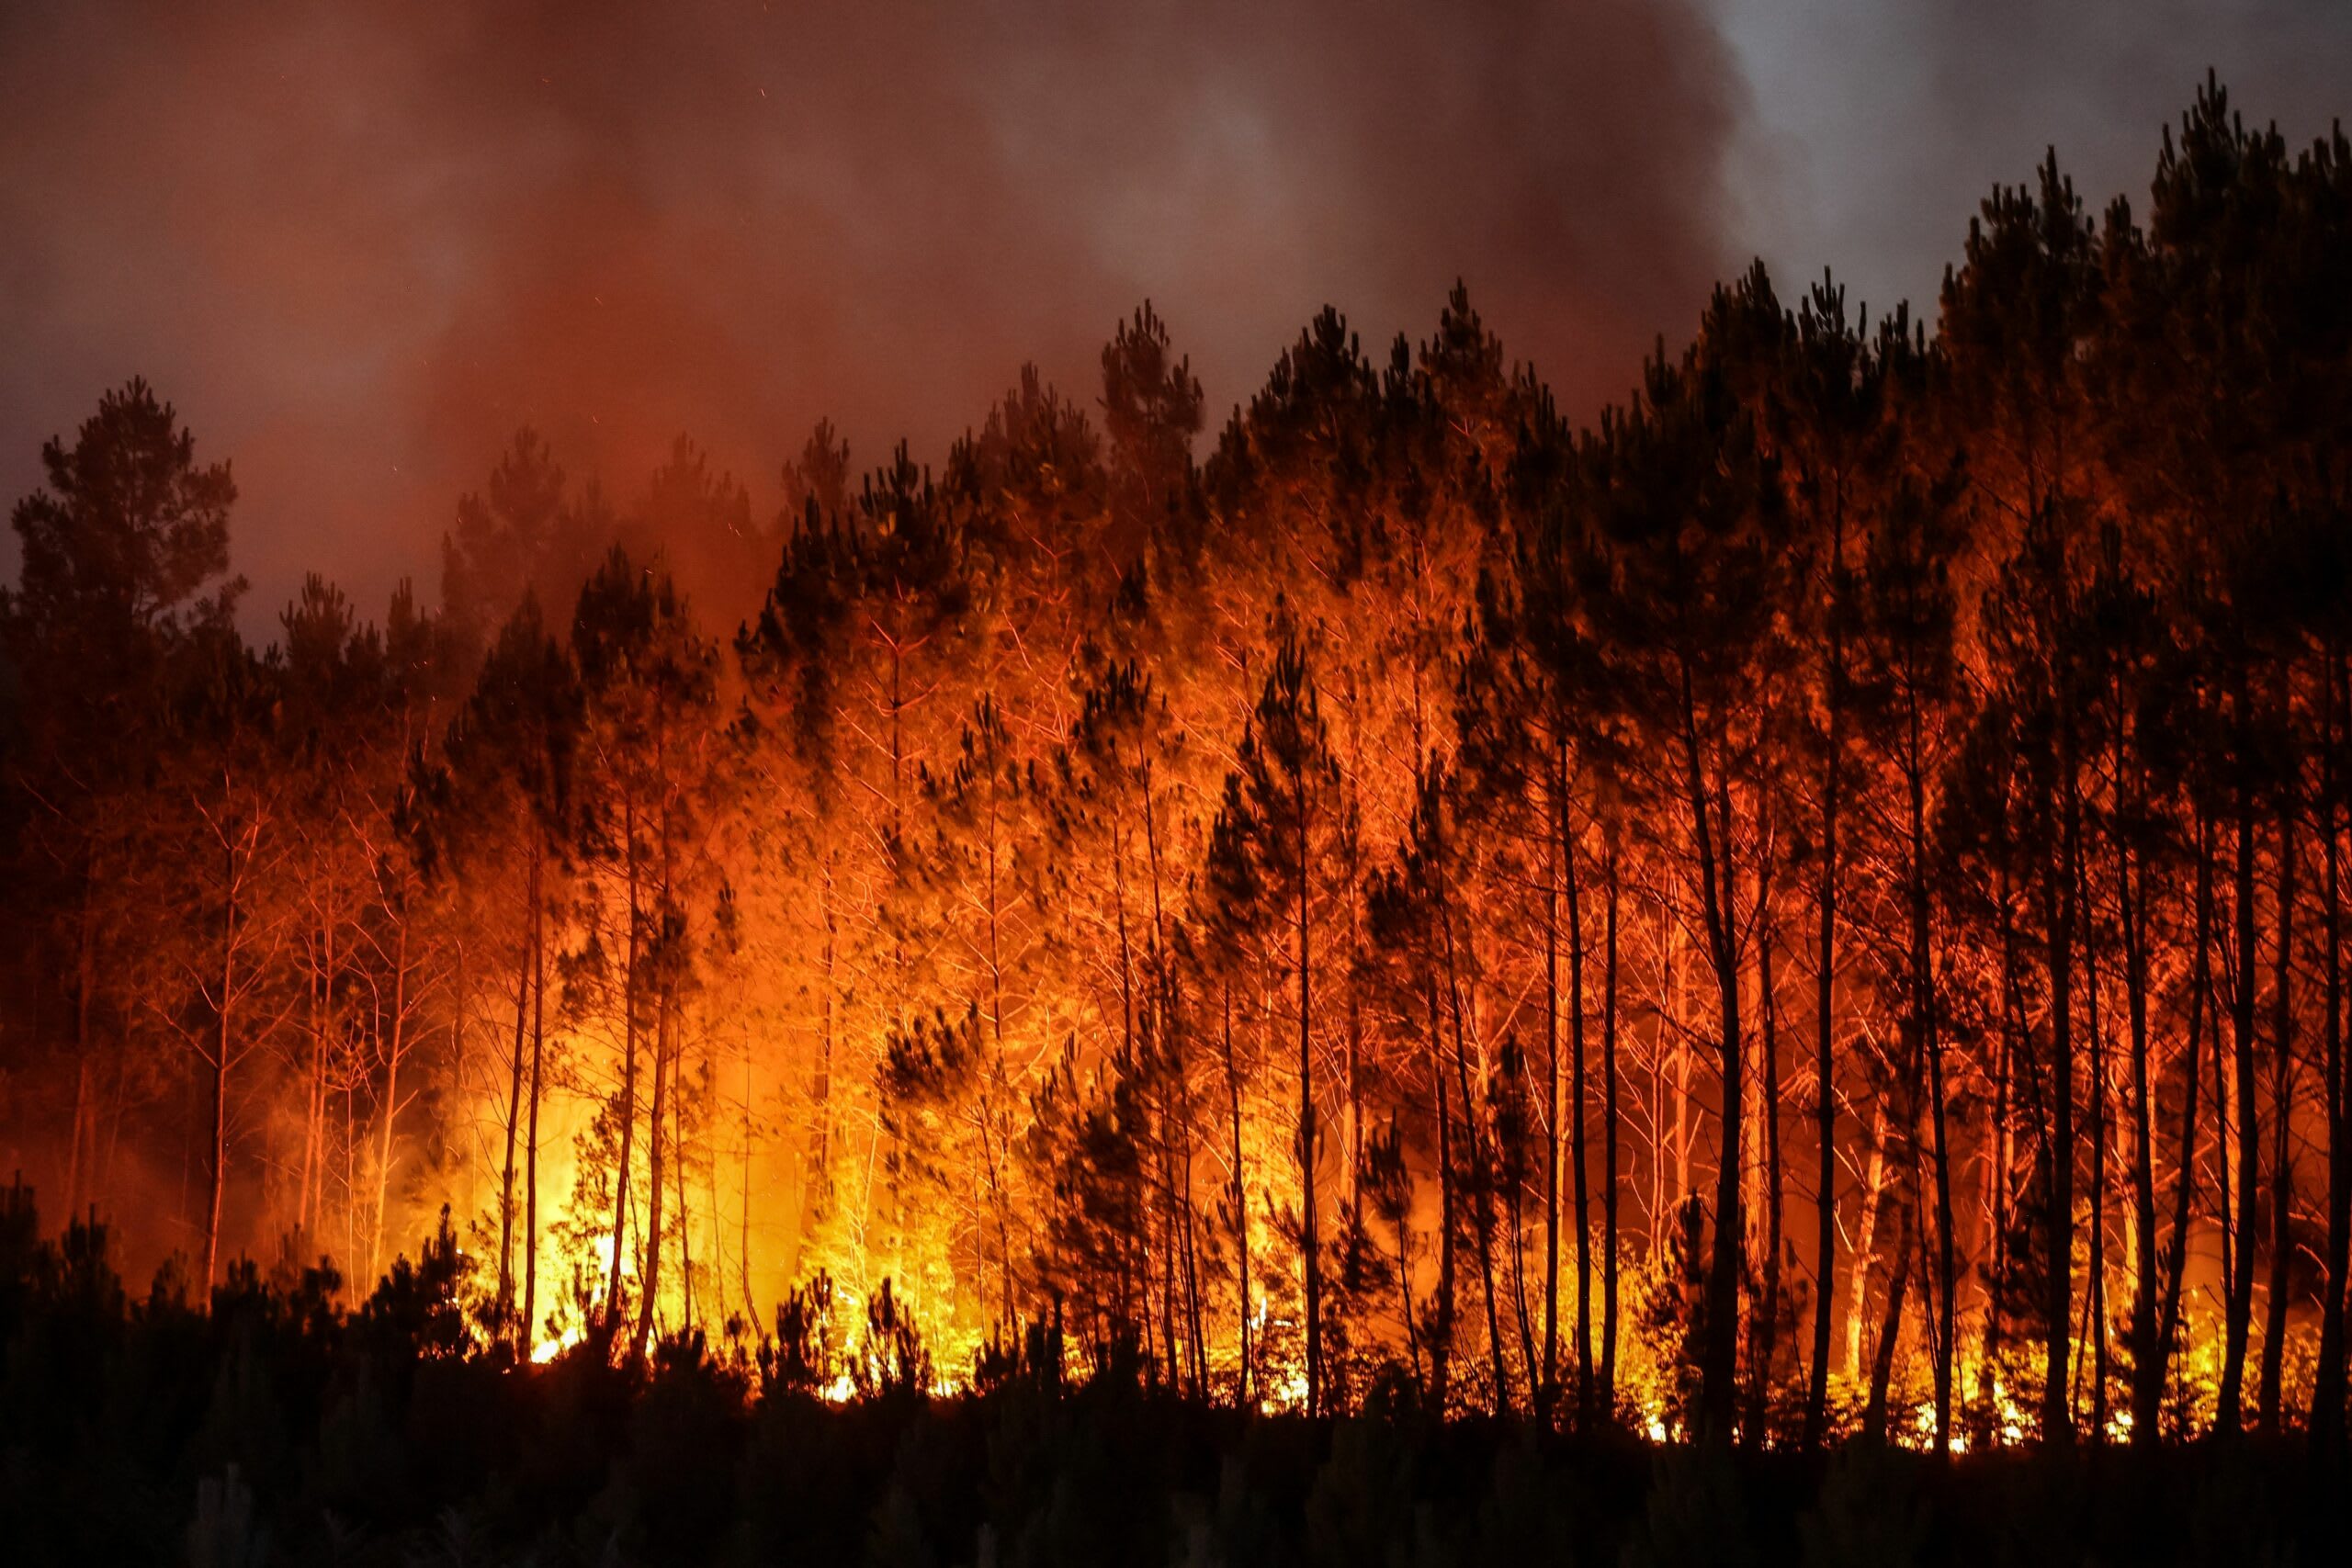 A forest fire in Louchats, southwestern France, on July 17, 2022. Credit: Thibaud Moritz/AFP via Getty Images